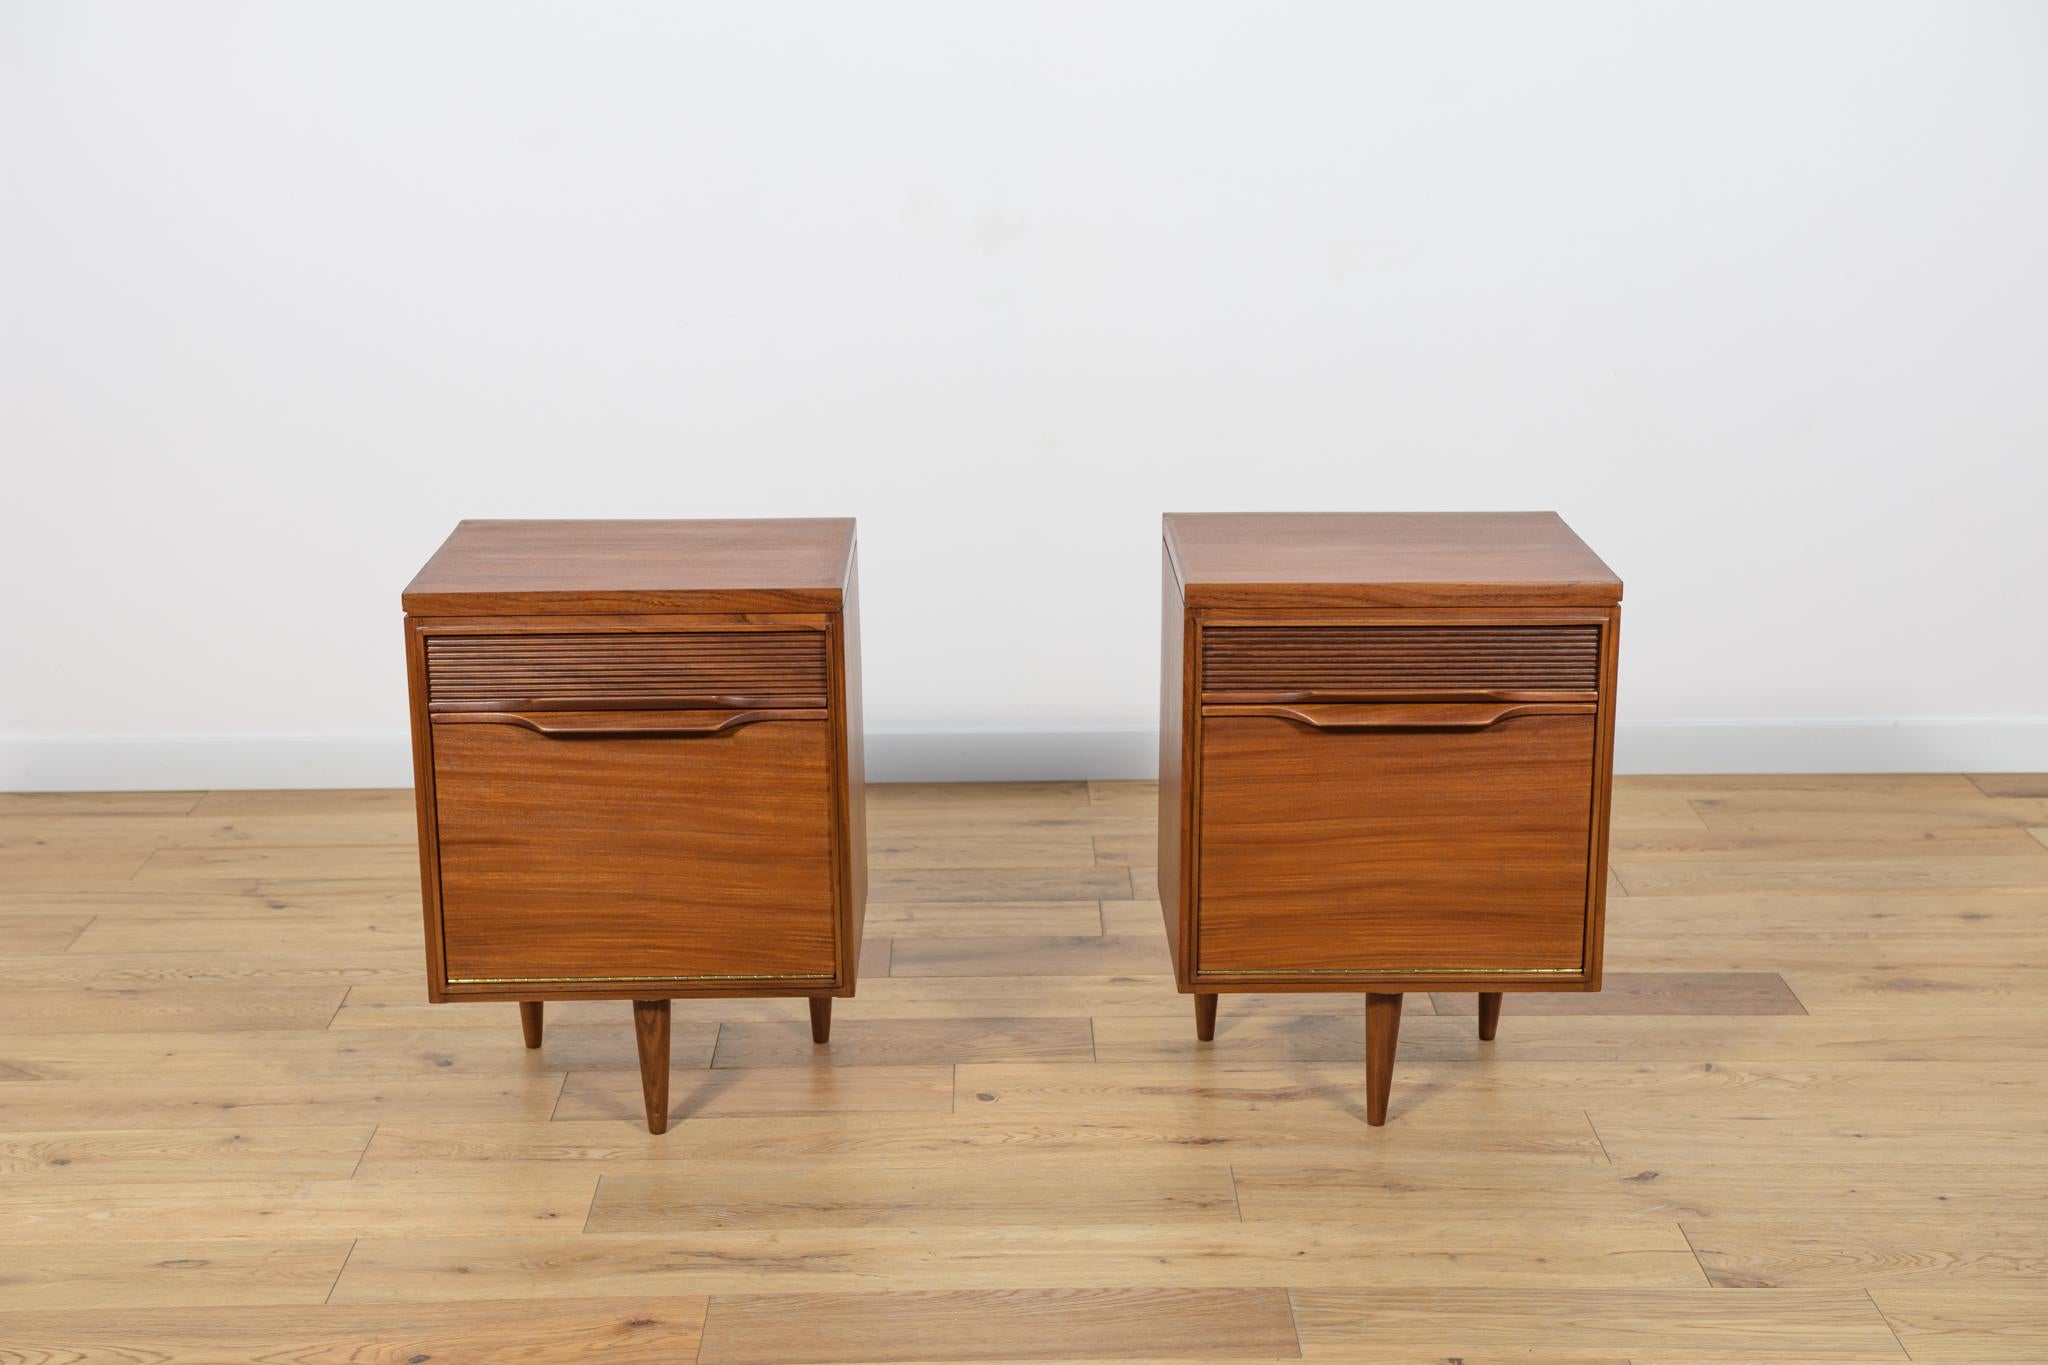 
A pair of bedside tables manufactured by the British White & Newton manufactory in the 1960s in Portsmouth. The furniture consists of a cabinet located in the lower part and a drawer. Grooved drawers and profiled handles give the cabinet